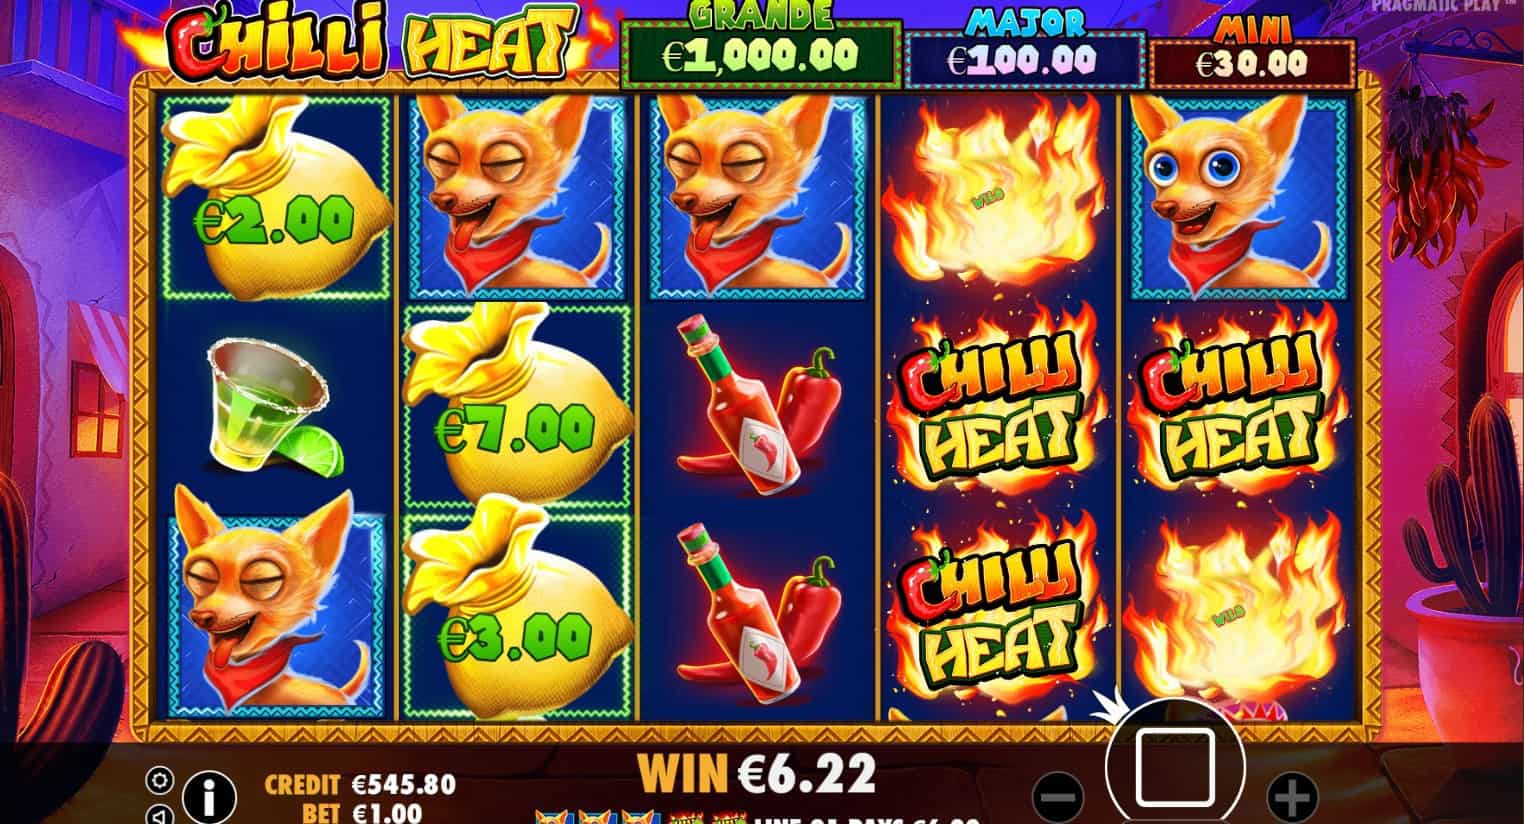 Types of Jackpot Slot Games